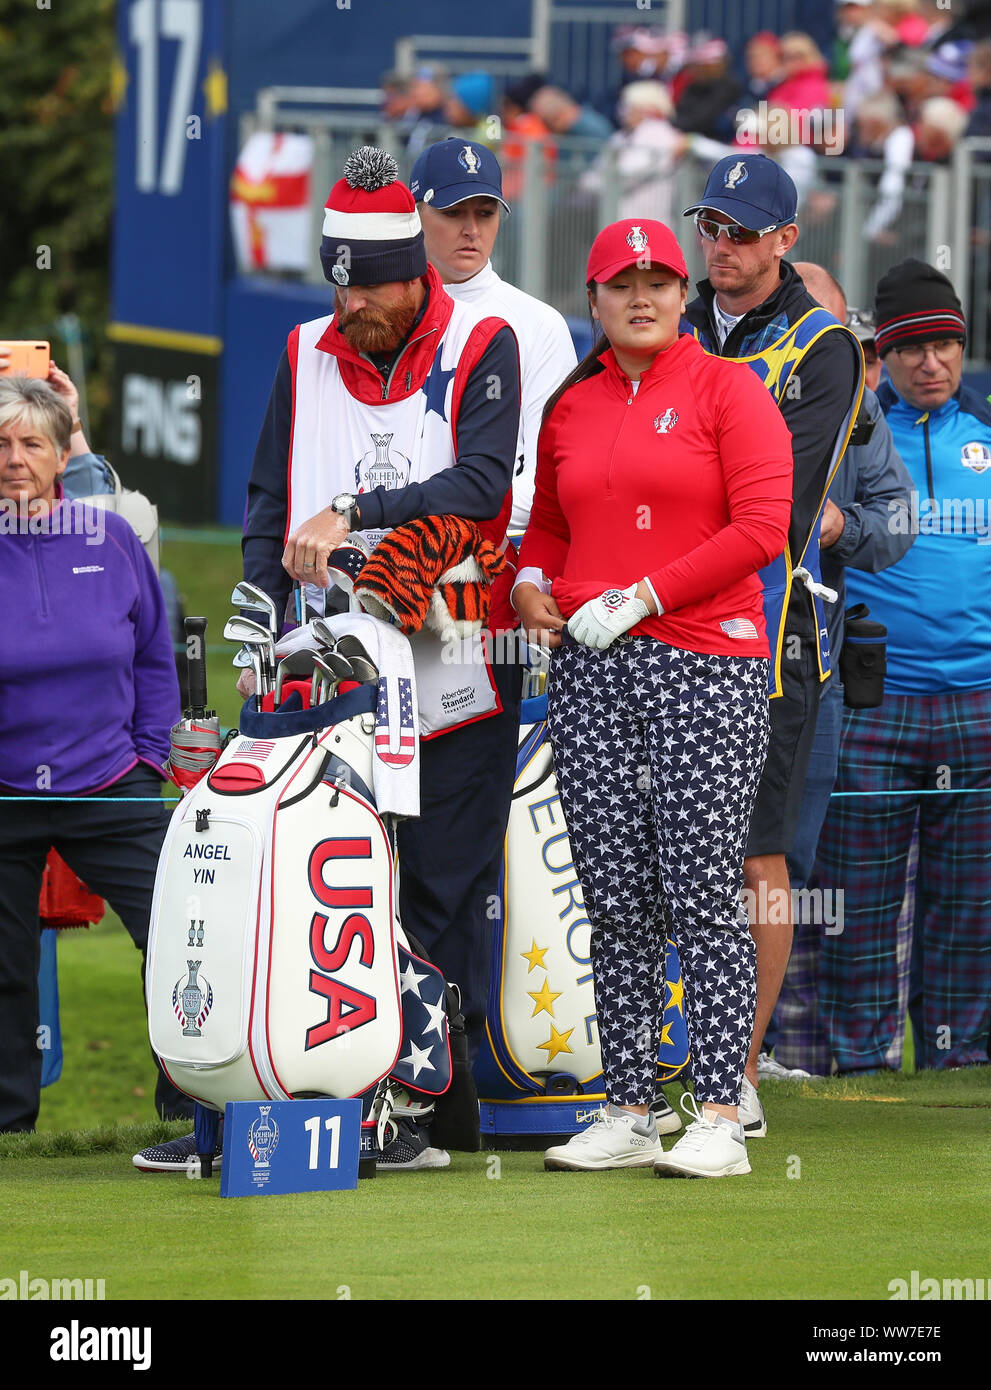 Gleneagles, UK. 13th Sep, 2019. ANNA NORDQVIST and CAROLINE HEDWALL (Europe) played against ALLY McDONALD and ANGEL YIN (USA) over the PGA Centenary course at Gleneagles in the Friday afternoon 'fourballs. The game finished on the 13th when USA - McDonald and Yin -won by 7 and 5. Angel Yin teeing off at the 11th tee.Credit: Findlay/Alamy Live News Stock Photo